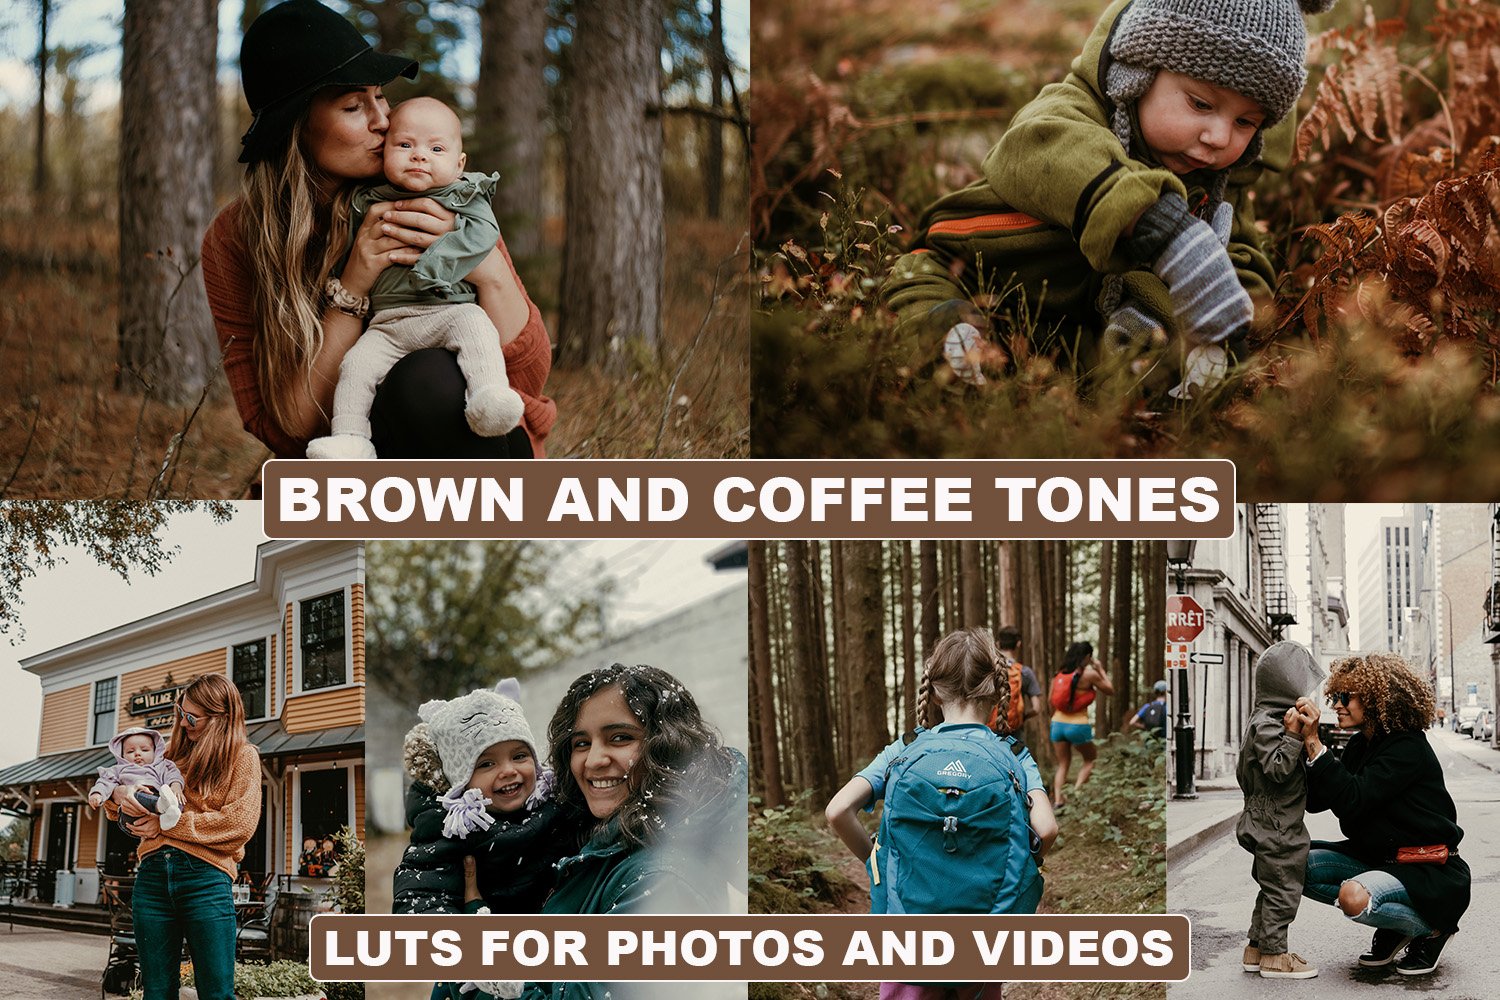 LUTS PACK for Videos and Photoscover image.